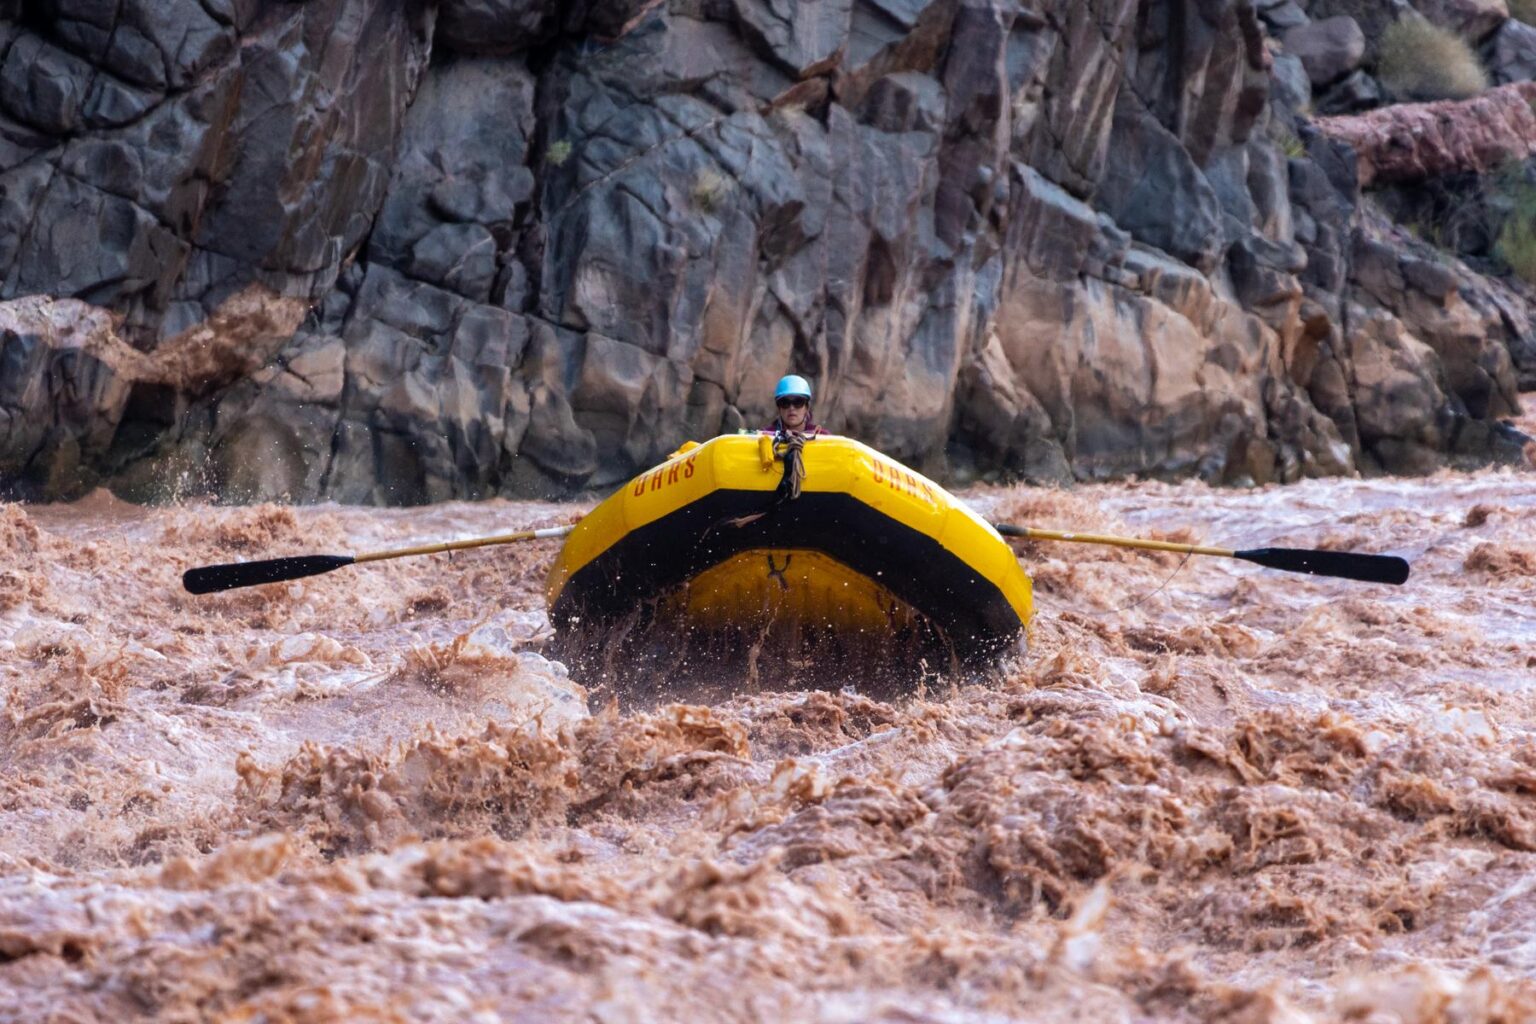 A river guide maneuvers a big yellow raft down the muddy waters of the Colorado River in Grand Canyon.